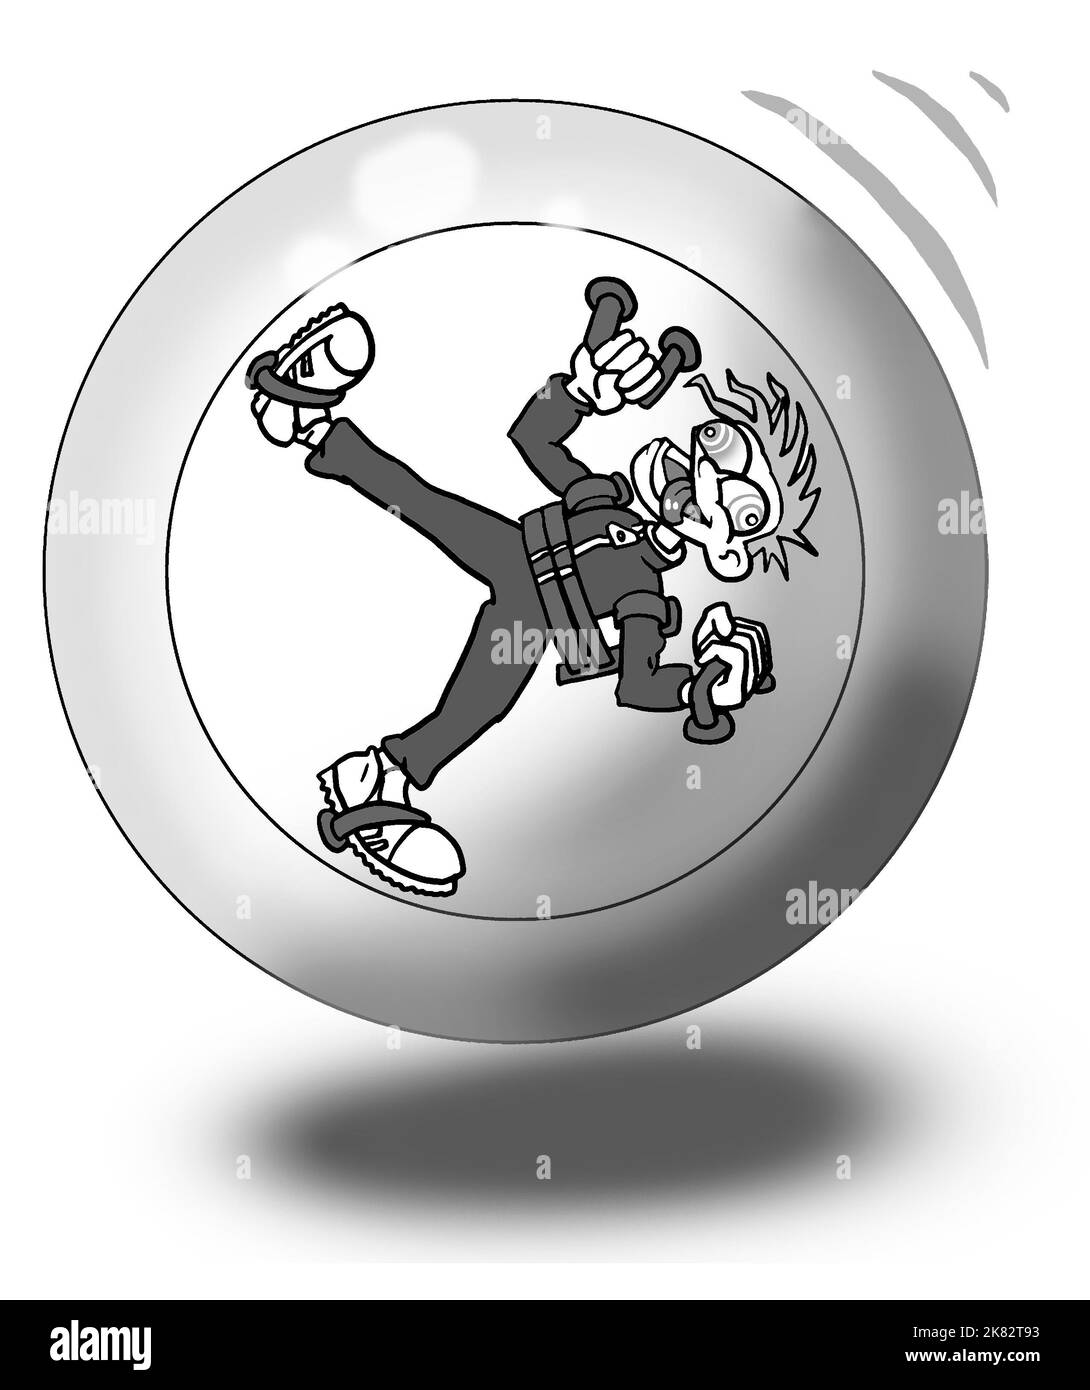 Cartoon art showing a man zorbing. This is the recreation or sport of rolling downhill inside a transparent zorb. It can also be carried out on water. Stock Photo